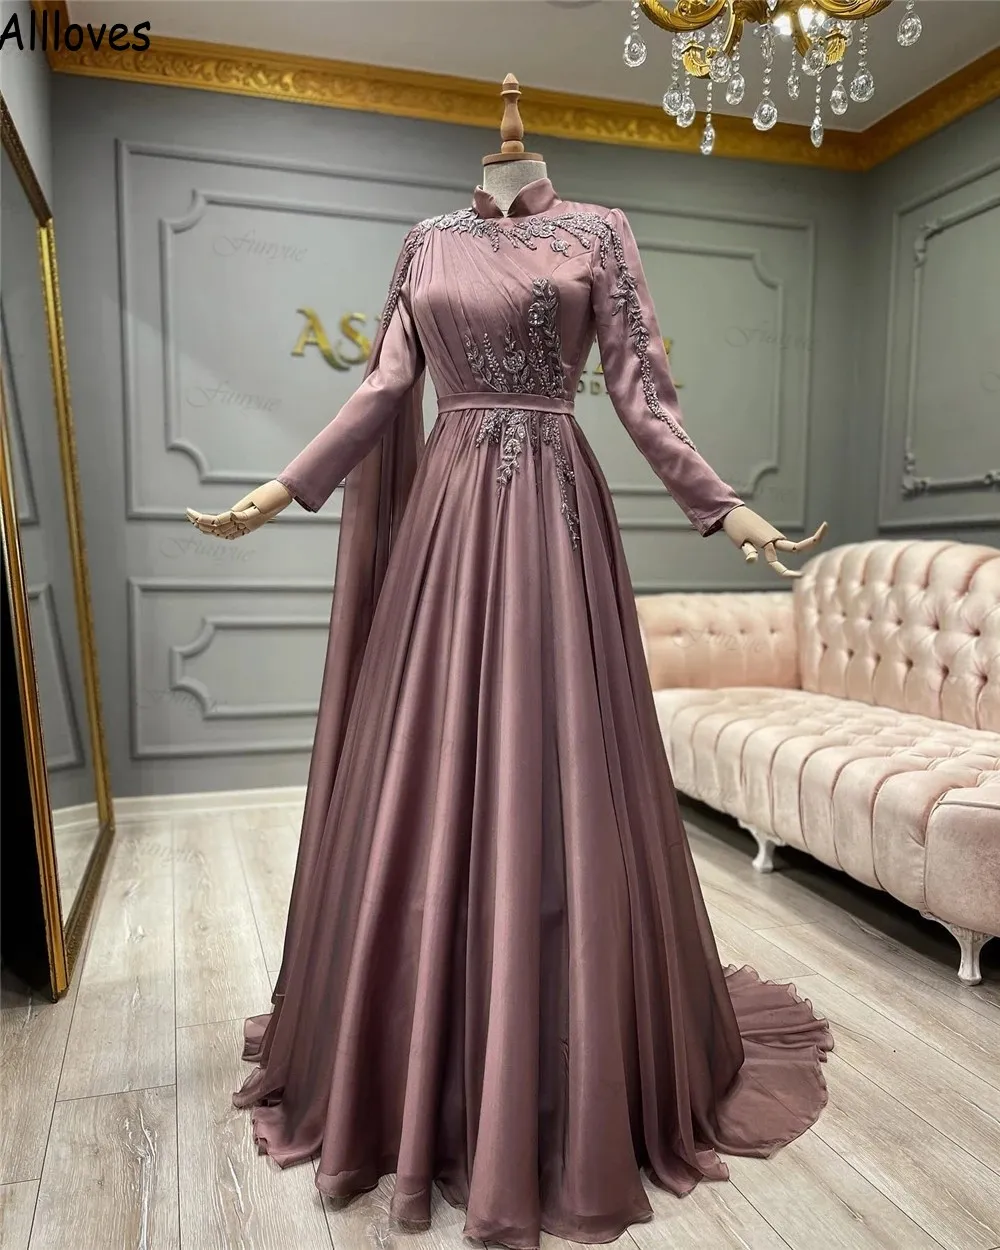 High Collar Muslim Caftan Moroccan Prom Dresses Dubai Arabic Long Sleeves Women Formal Occasion Evening Gowns With Side Wrap Lace Appliques Beaded Vestidos CL1748